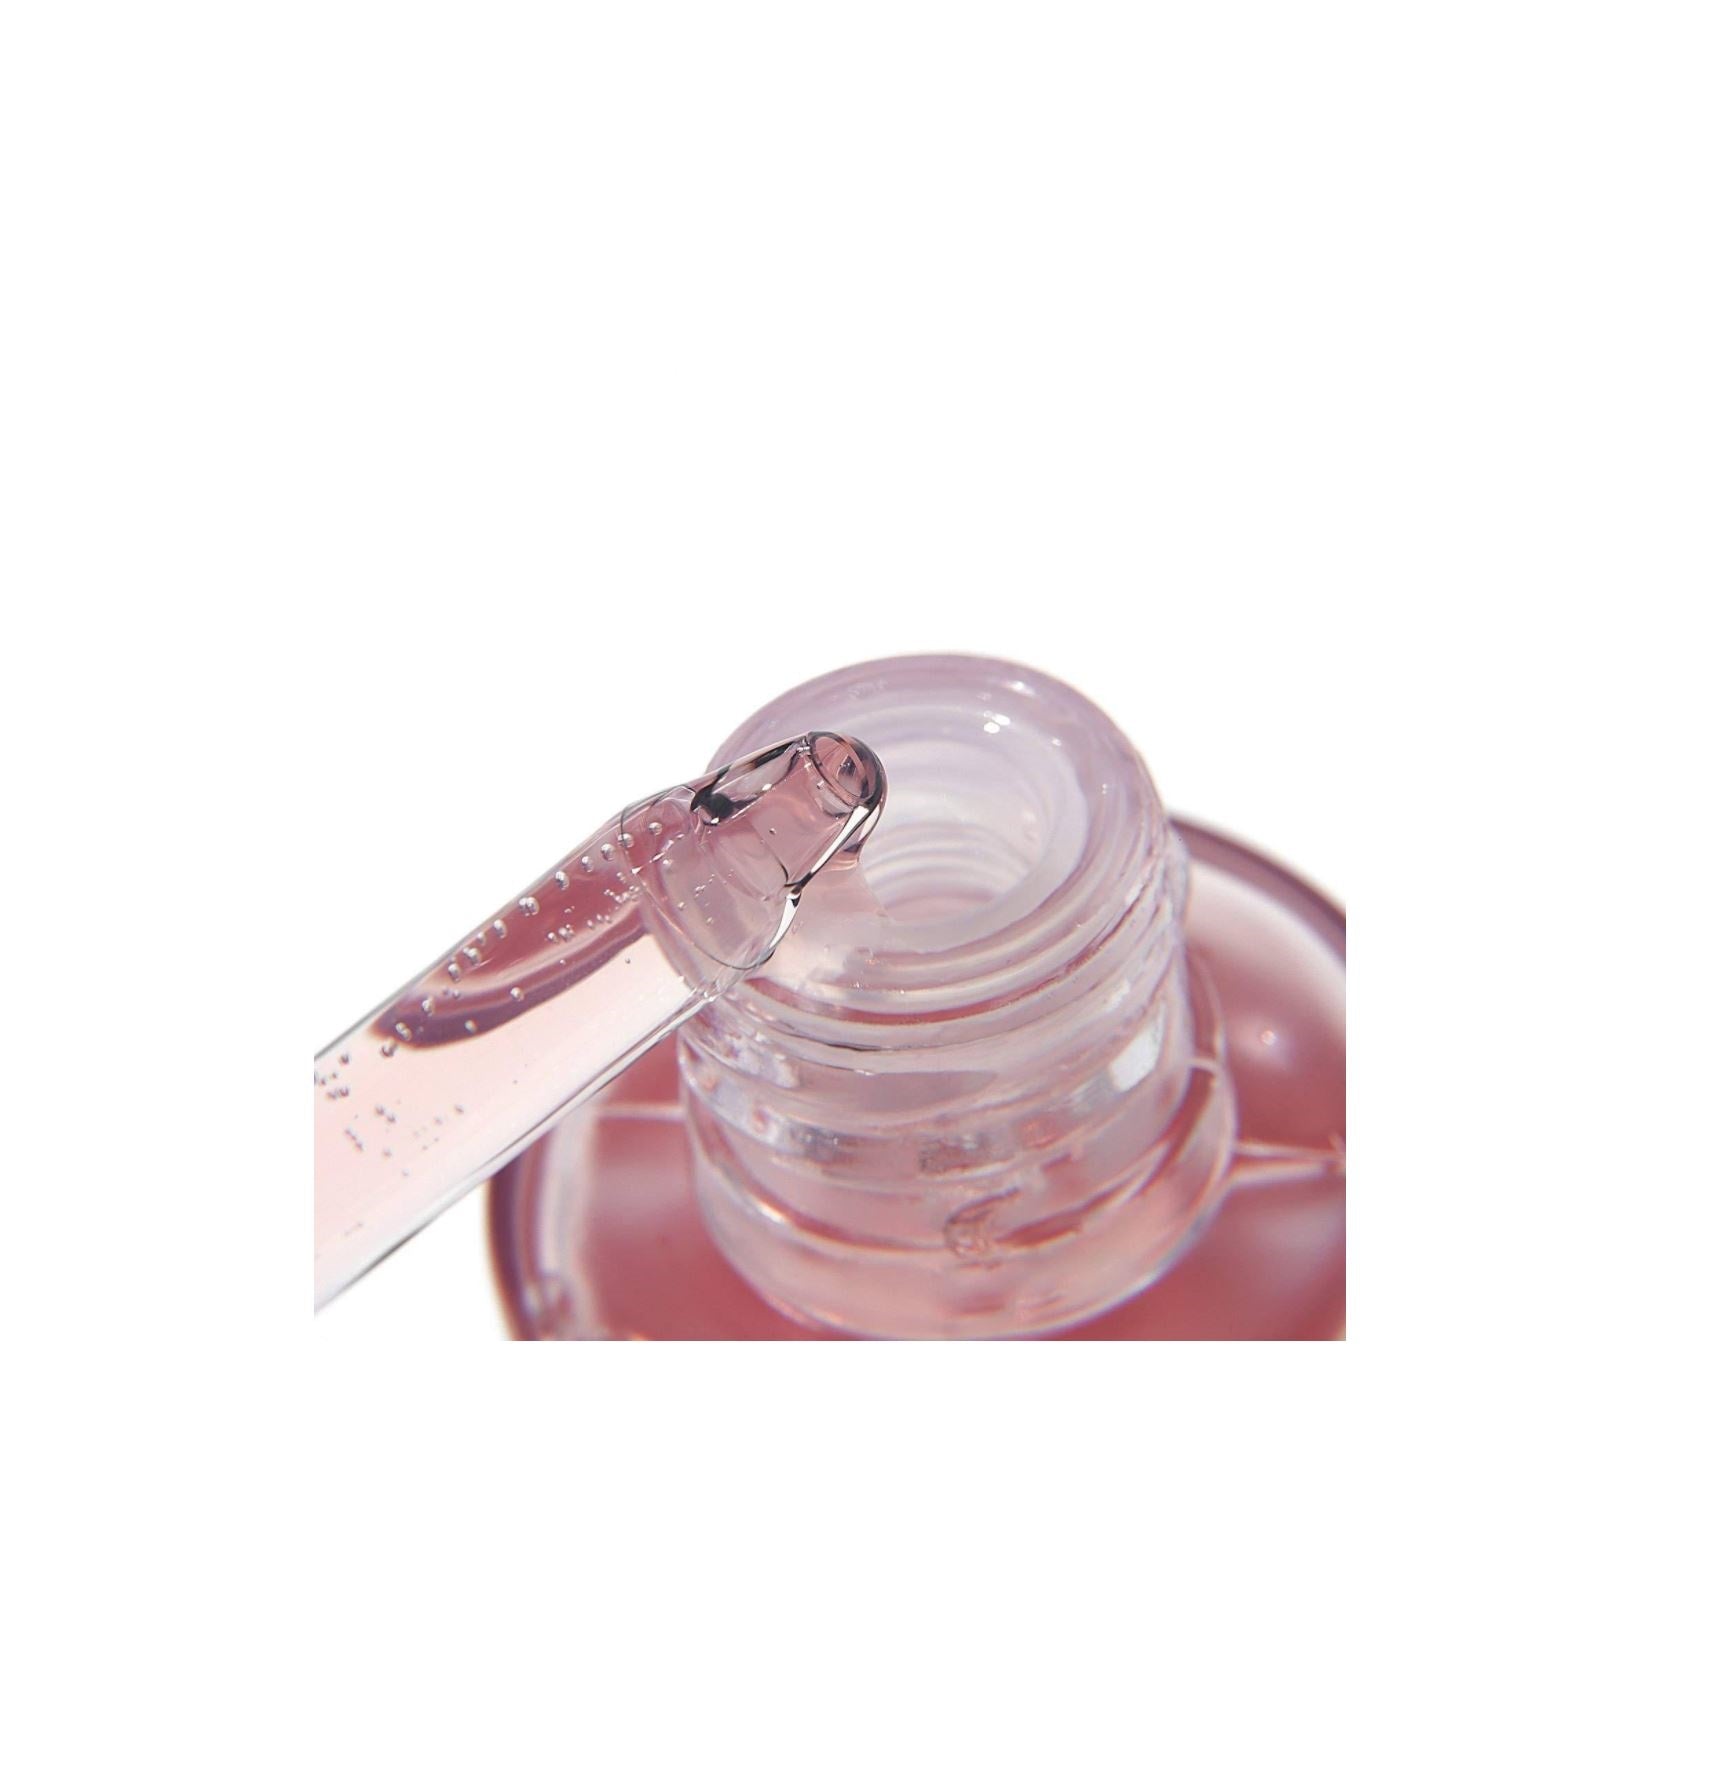 Sioris A calming day Ampoule 35ml